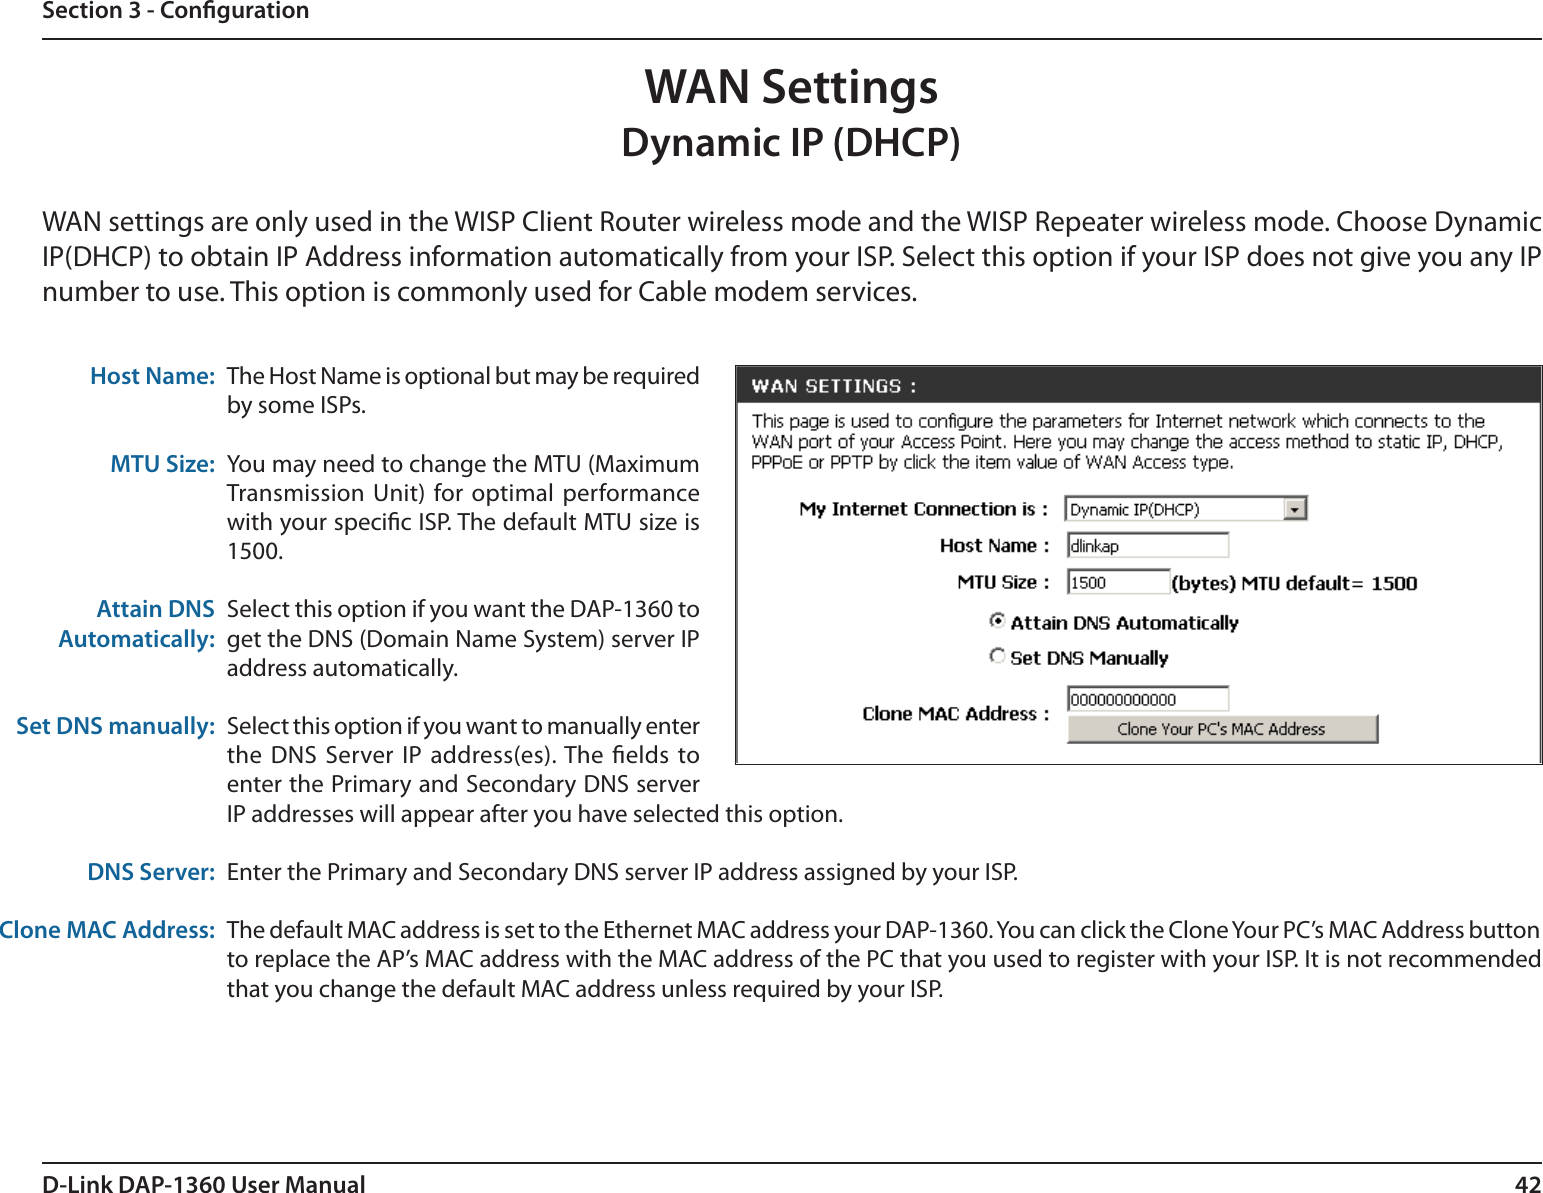 42D-Link DAP-1360 User ManualSection 3 - CongurationWAN SettingsDynamic IP (DHCP)WAN settings are only used in the WISP Client Router wireless mode and the WISP Repeater wireless mode. Choose Dynamic IP(DHCP) to obtain IP Address information automatically from your ISP. Select this option if your ISP does not give you any IP number to use. This option is commonly used for Cable modem services.Host Name:MTU Size:Attain DNS Automatically:Set DNS manually:DNS Server:Clone MAC Address:The Host Name is optional but may be required by some ISPs.You may need to change the MTU (Maximum Transmission  Unit) for optimal performance with your specic ISP. The default MTU size is 1500.Select this option if you want the DAP-1360 to get the DNS (Domain Name System) server IP address automatically.Select this option if you want to manually enter the DNS Server IP address(es). The elds to enter the Primary and Secondary DNS server IP addresses will appear after you have selected this option.Enter the Primary and Secondary DNS server IP address assigned by your ISP. The default MAC address is set to the Ethernet MAC address your DAP-1360. You can click the Clone Your PC’s MAC Address button to replace the AP’s MAC address with the MAC address of the PC that you used to register with your ISP. It is not recommended that you change the default MAC address unless required by your ISP.